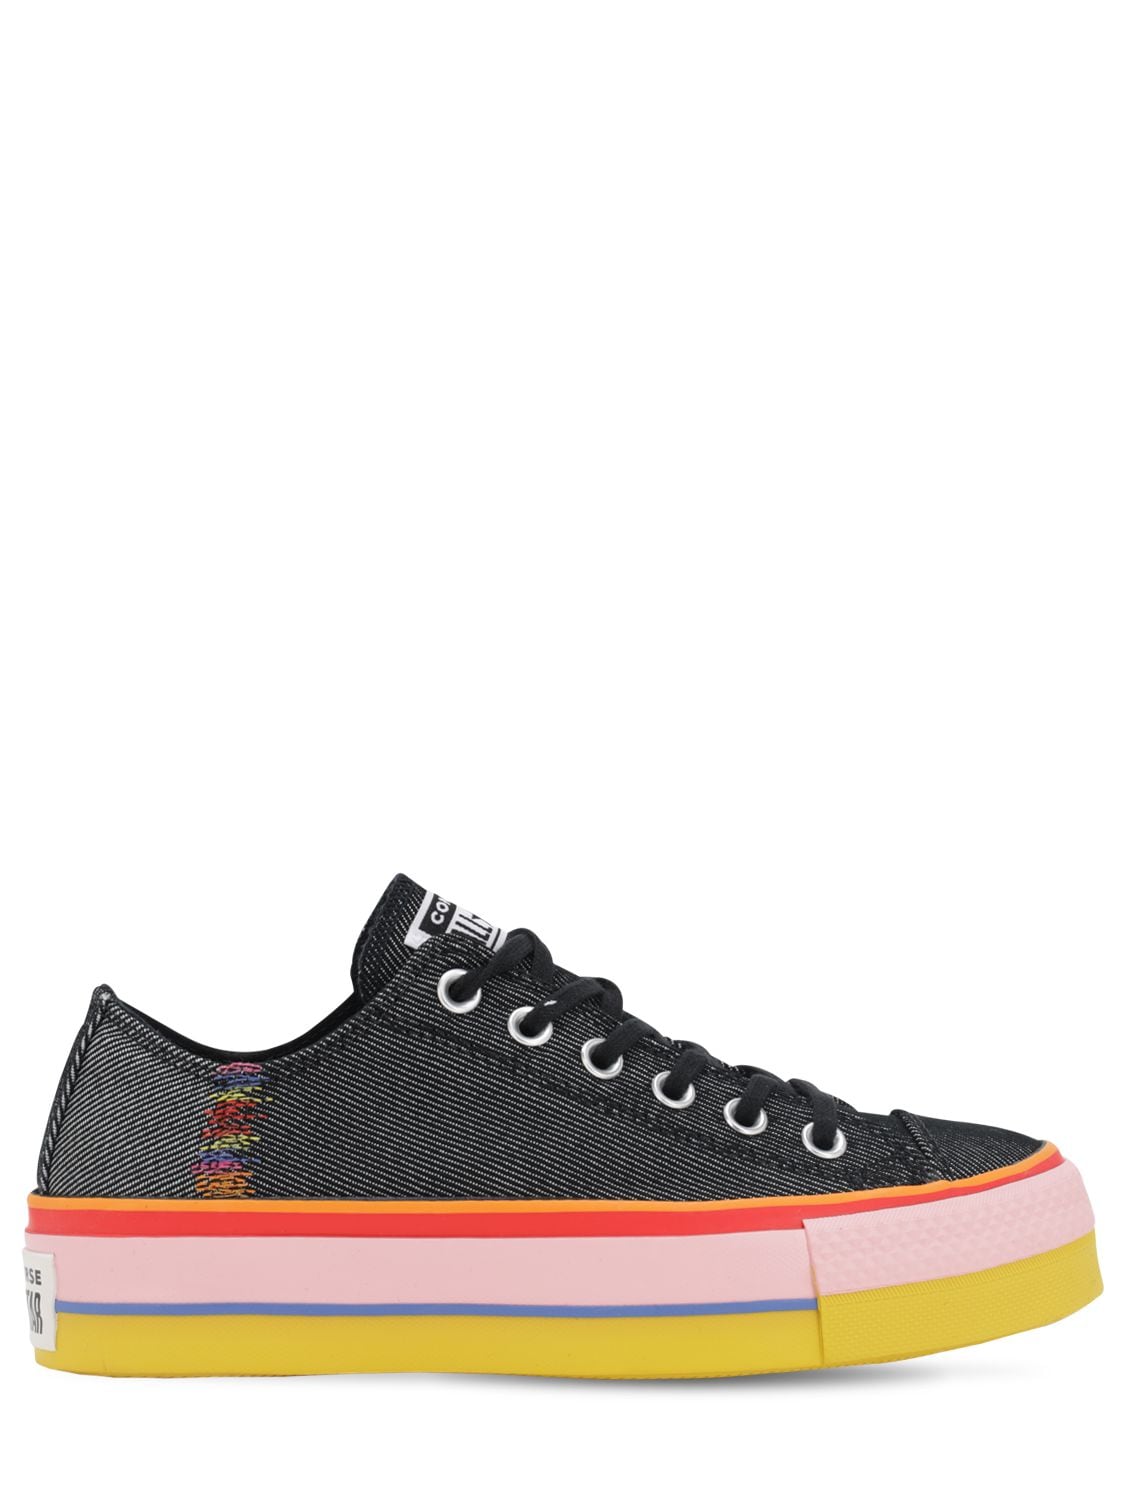 Converse Chuck Taylor All Star Lift Ox Trainers In Black,pink